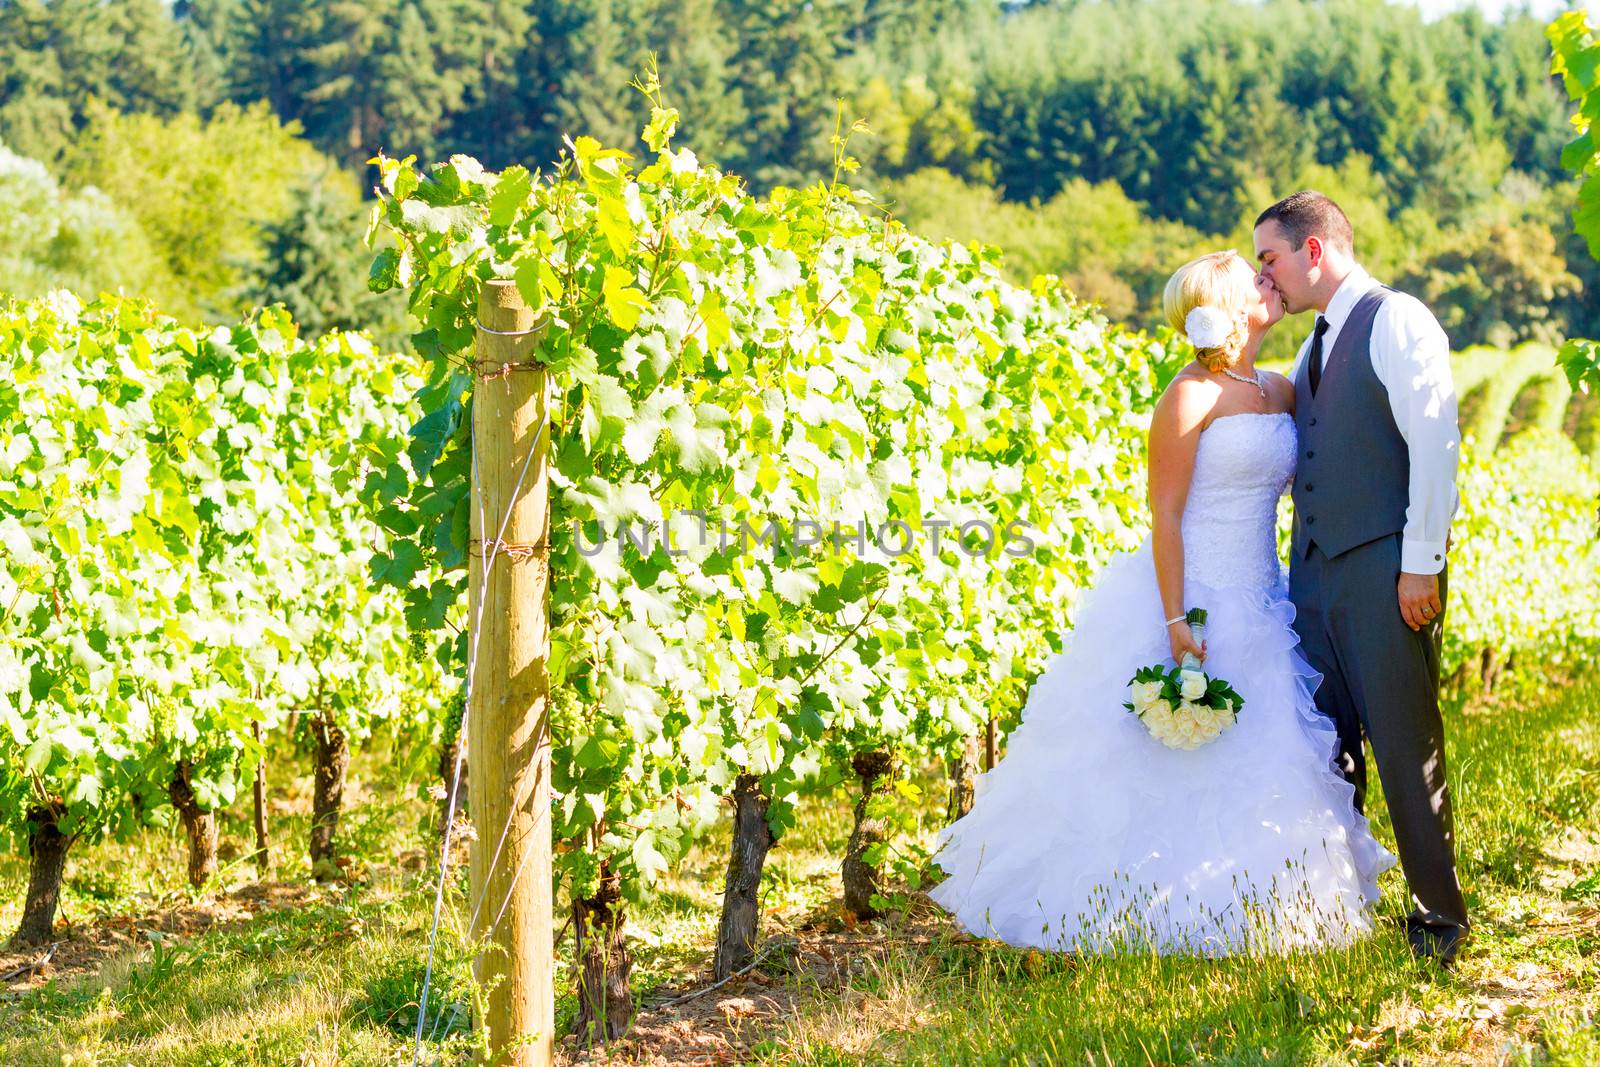 A bride and groom share a kiss after their ceremony on their wedding day at a vineyard winery in Oregon outdoors.